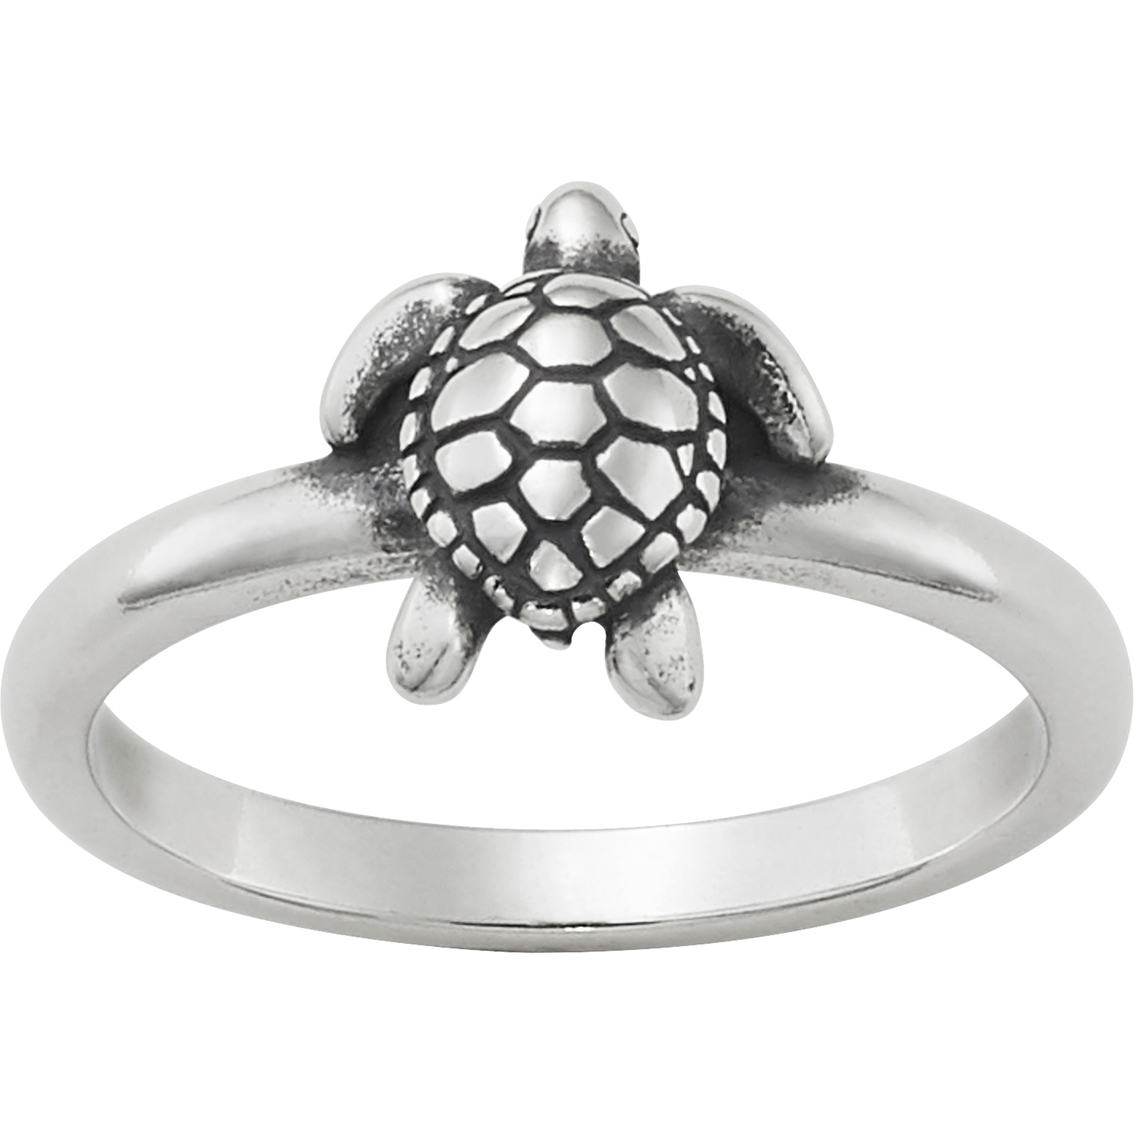 James Avery Sterling Silver Sea Turtle Ring | Silver Rings | Jewelry ...